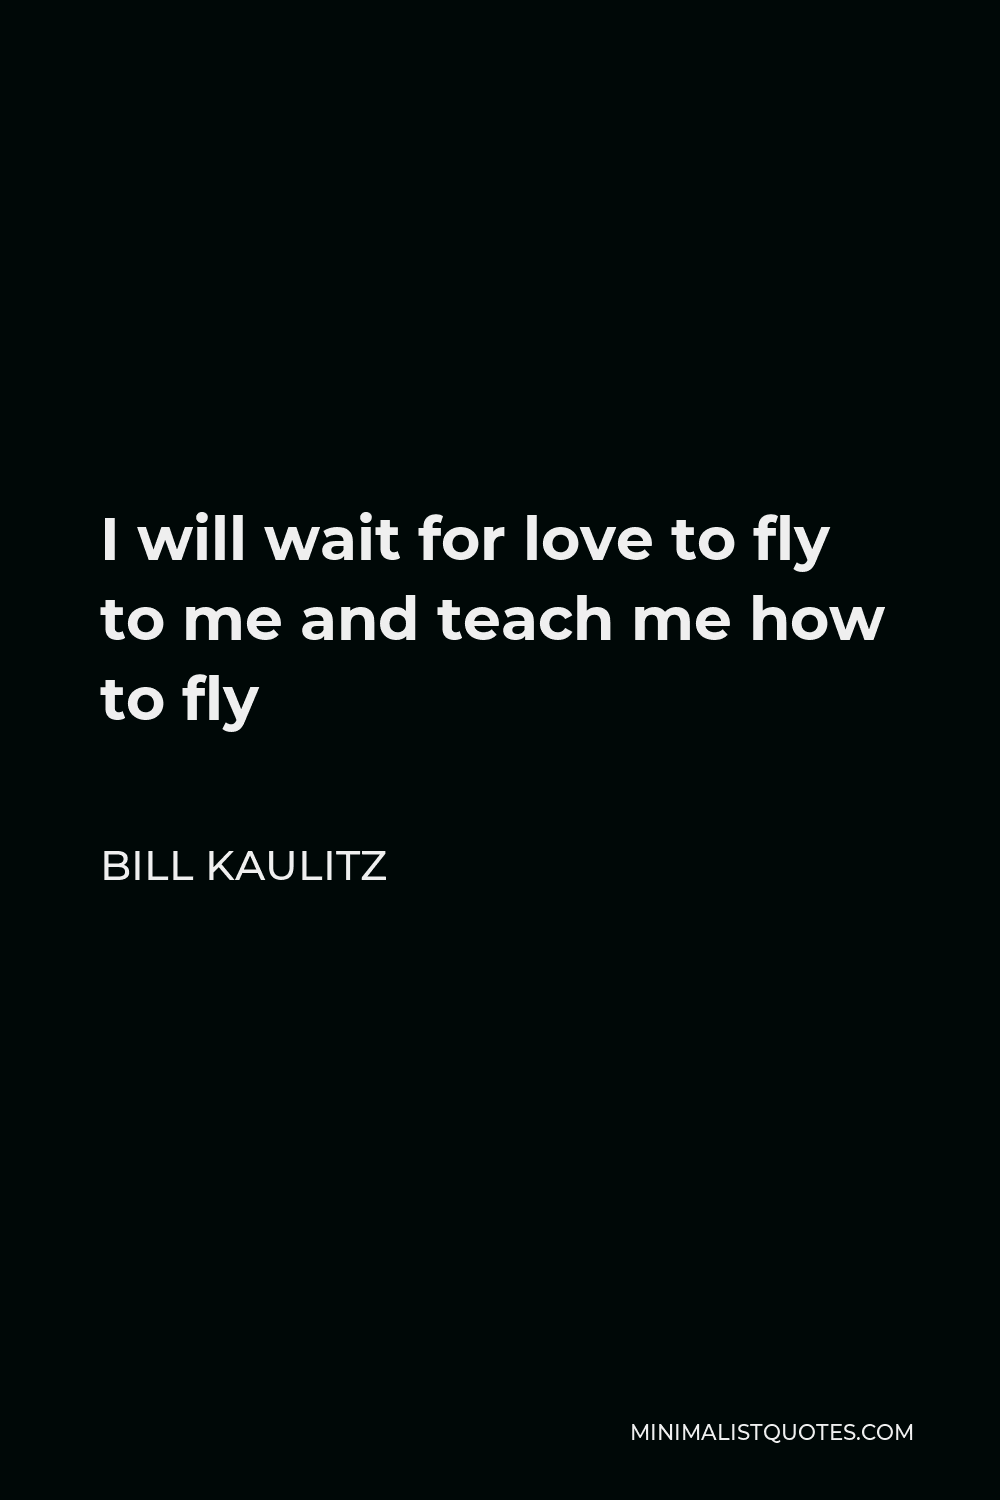 Bill Kaulitz Quote - I will wait for love to fly to me and teach me how to fly